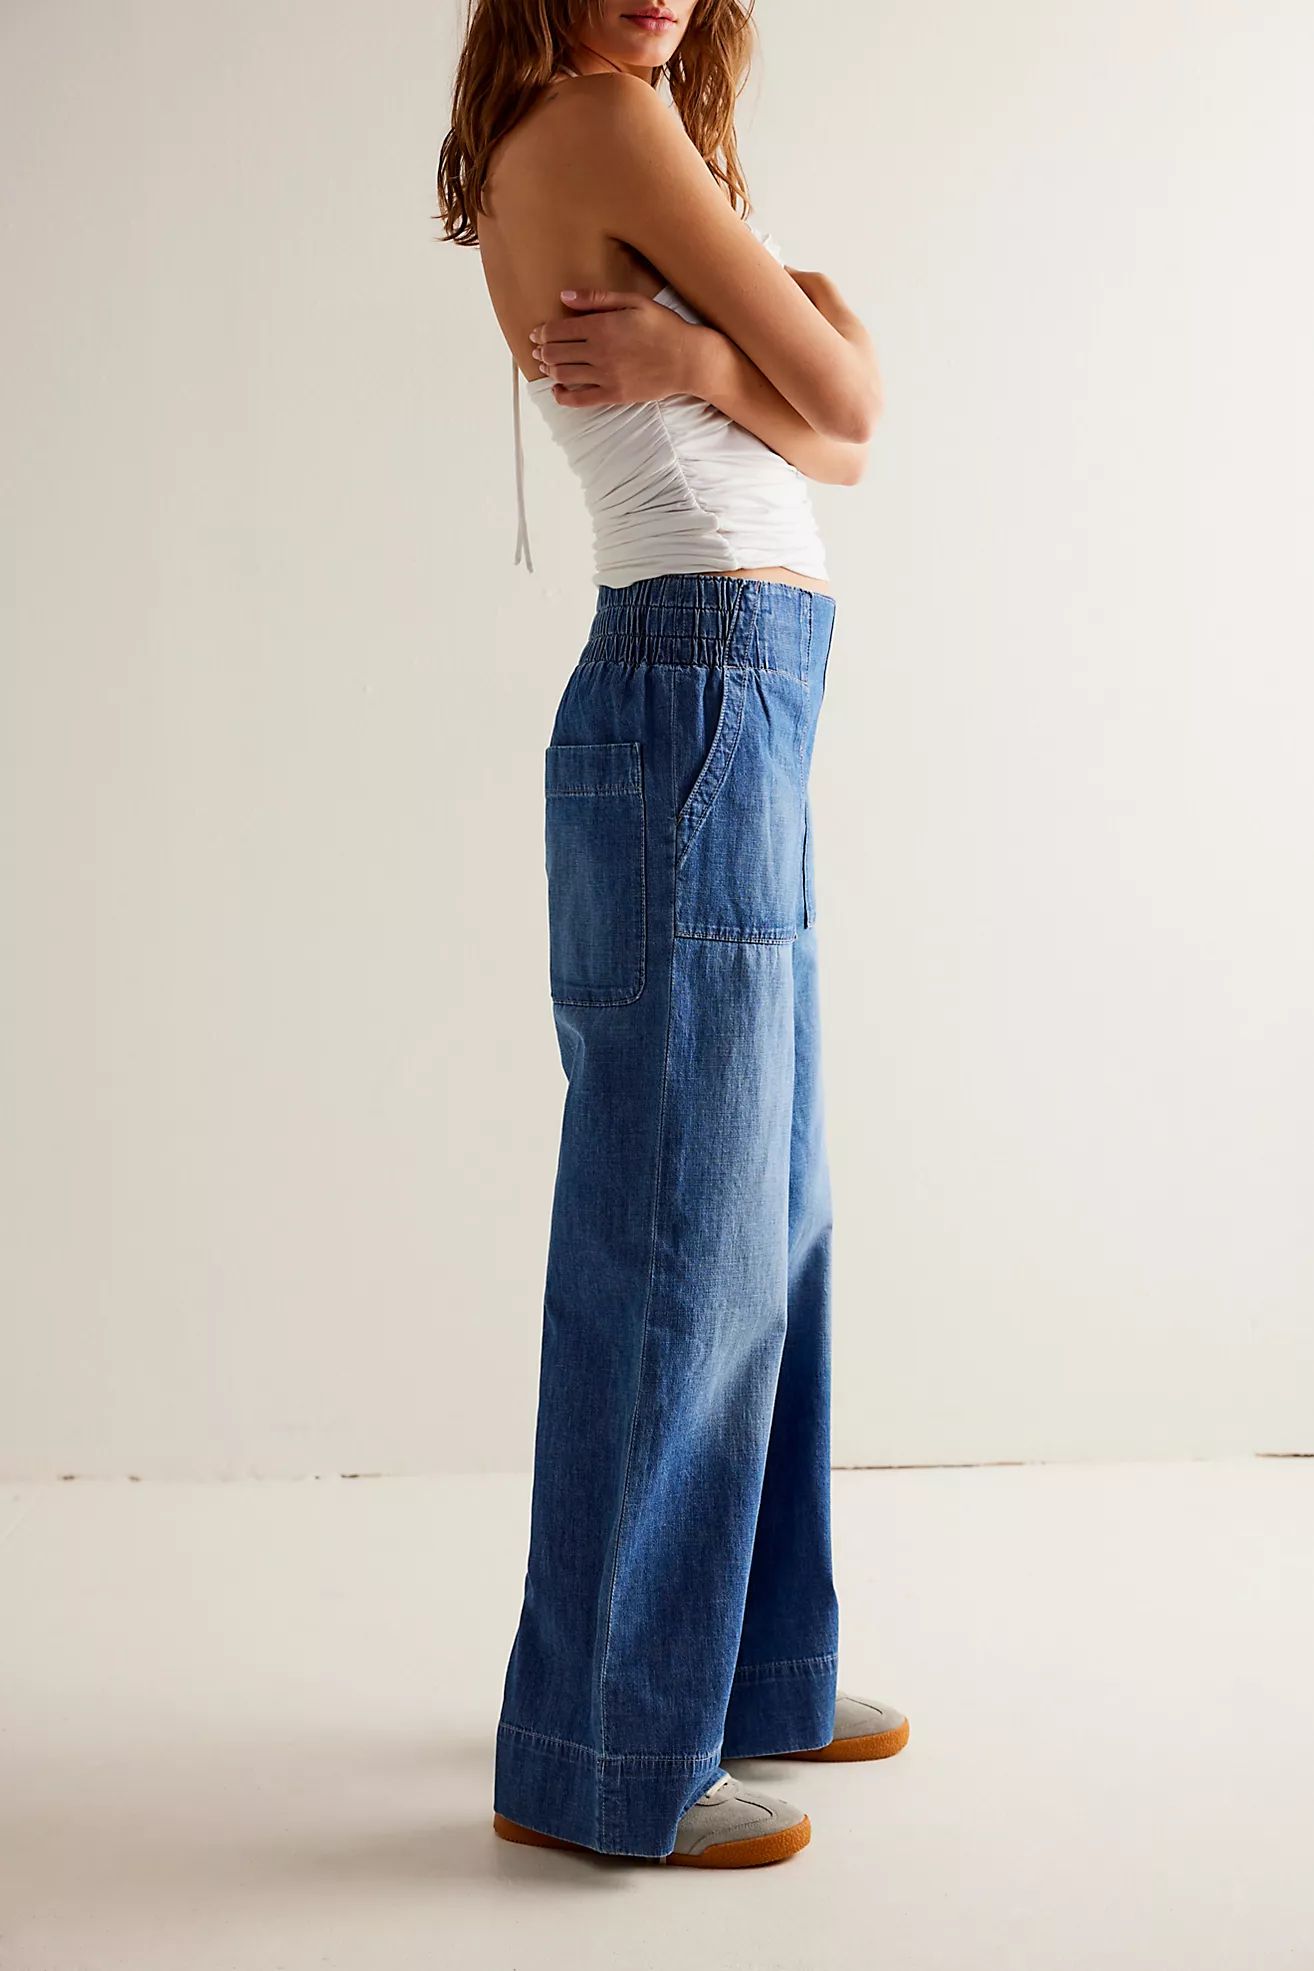 We The Free Breezy Denim Pull-On Jeans | Free People (UK)